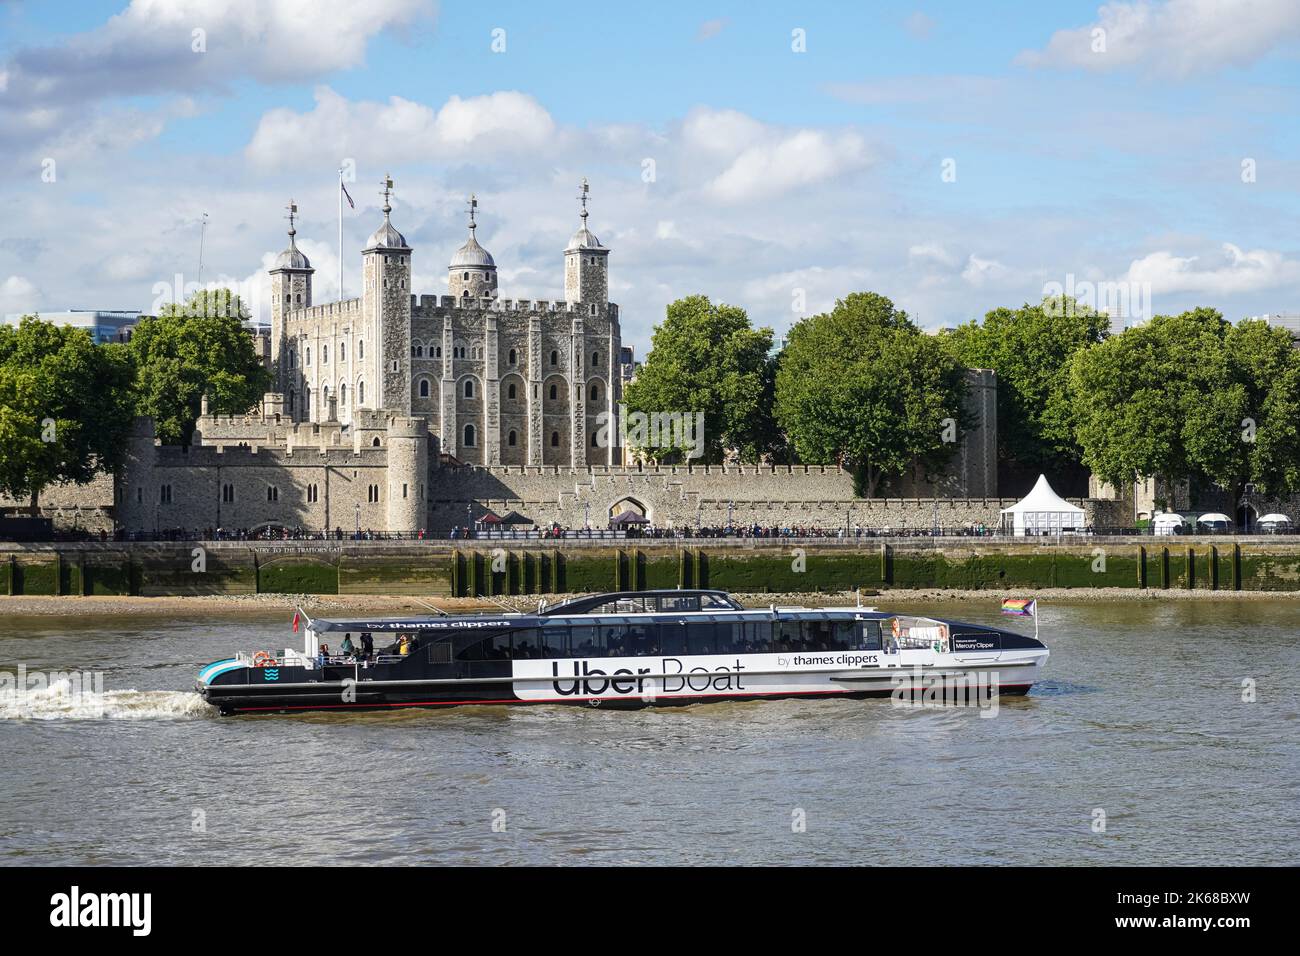 Thames clipper, Uber Boat passing the Tower of London on the River Thames,  London England United Kingdom UK Stock Photo - Alamy